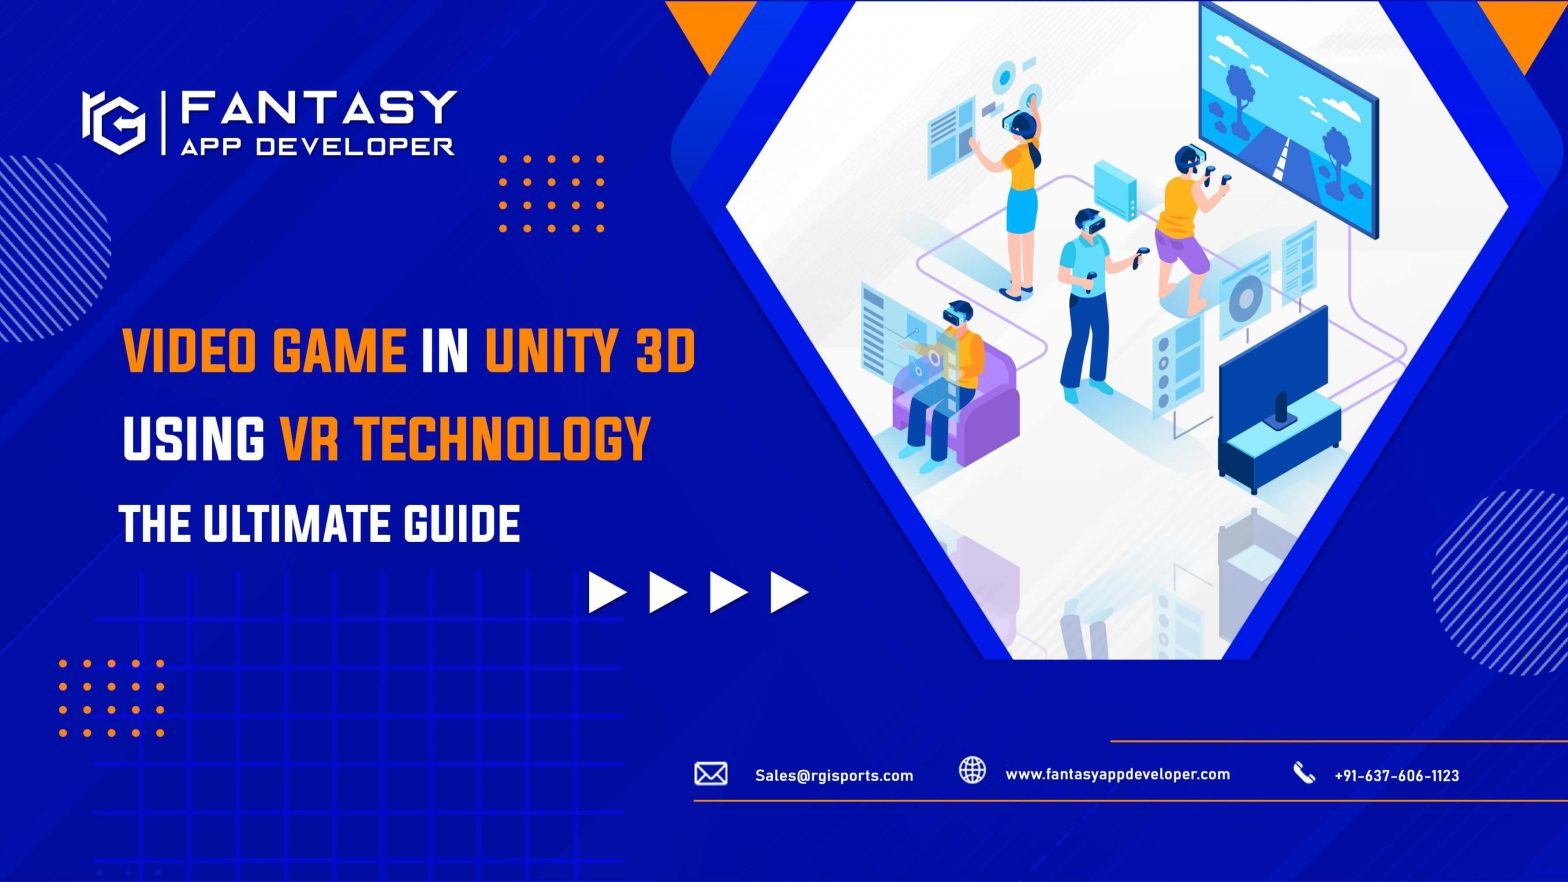 Video Games in Unity 3D Using VR Technology The Ultimate Guide